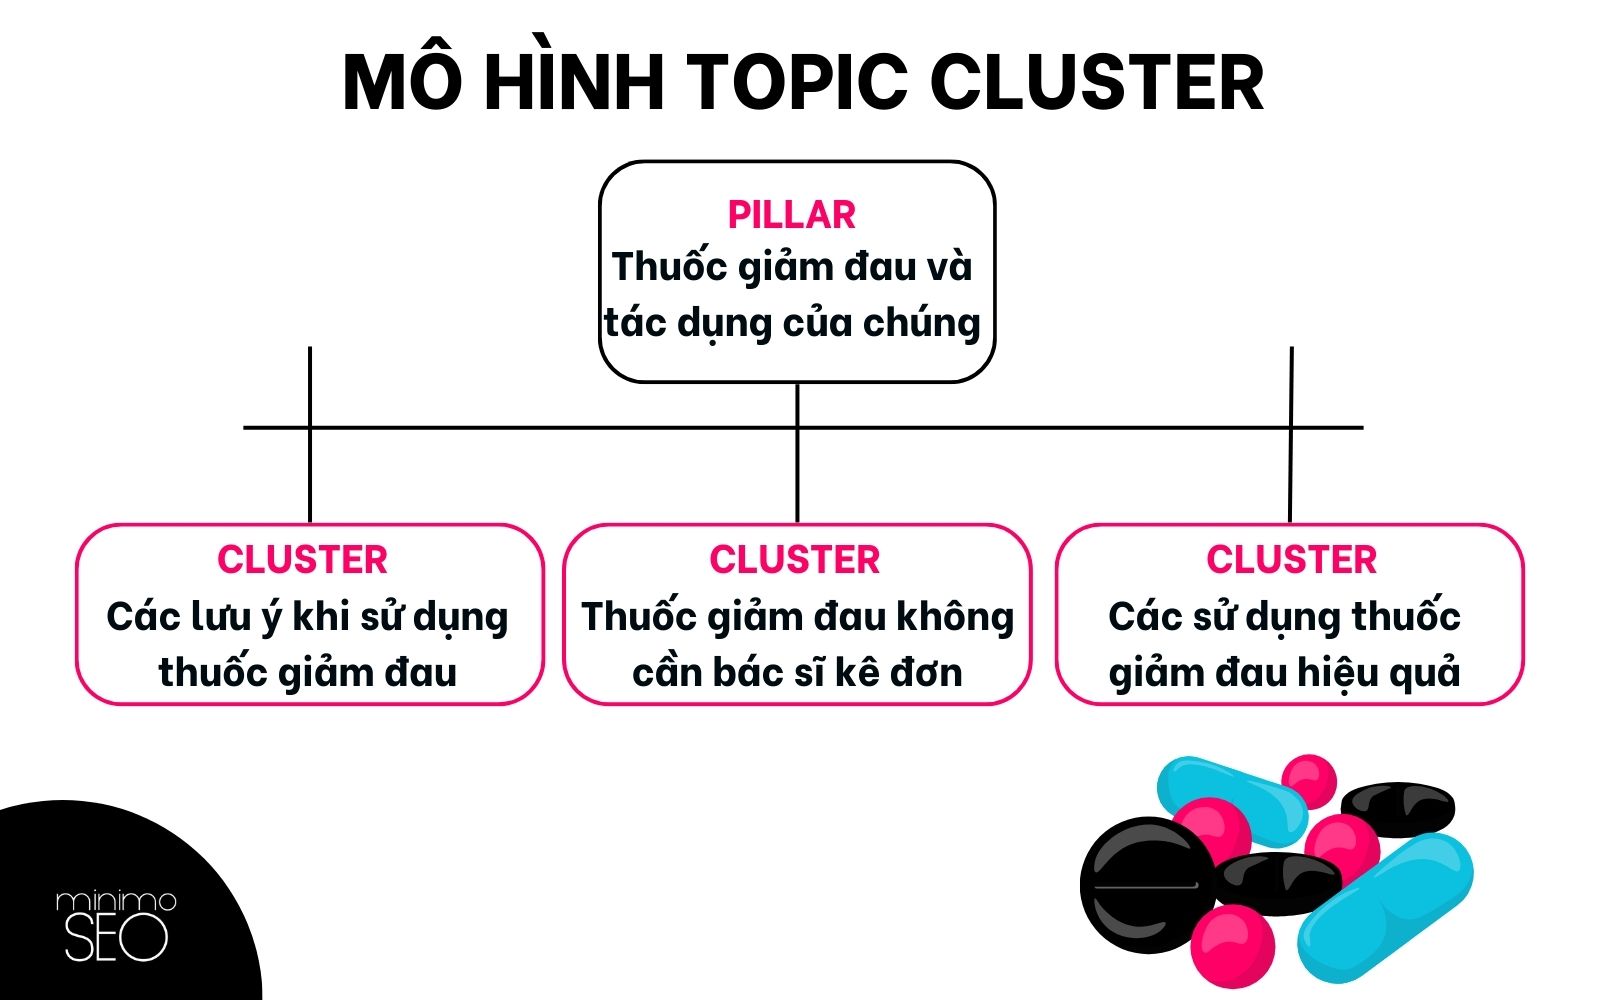 topic cluster